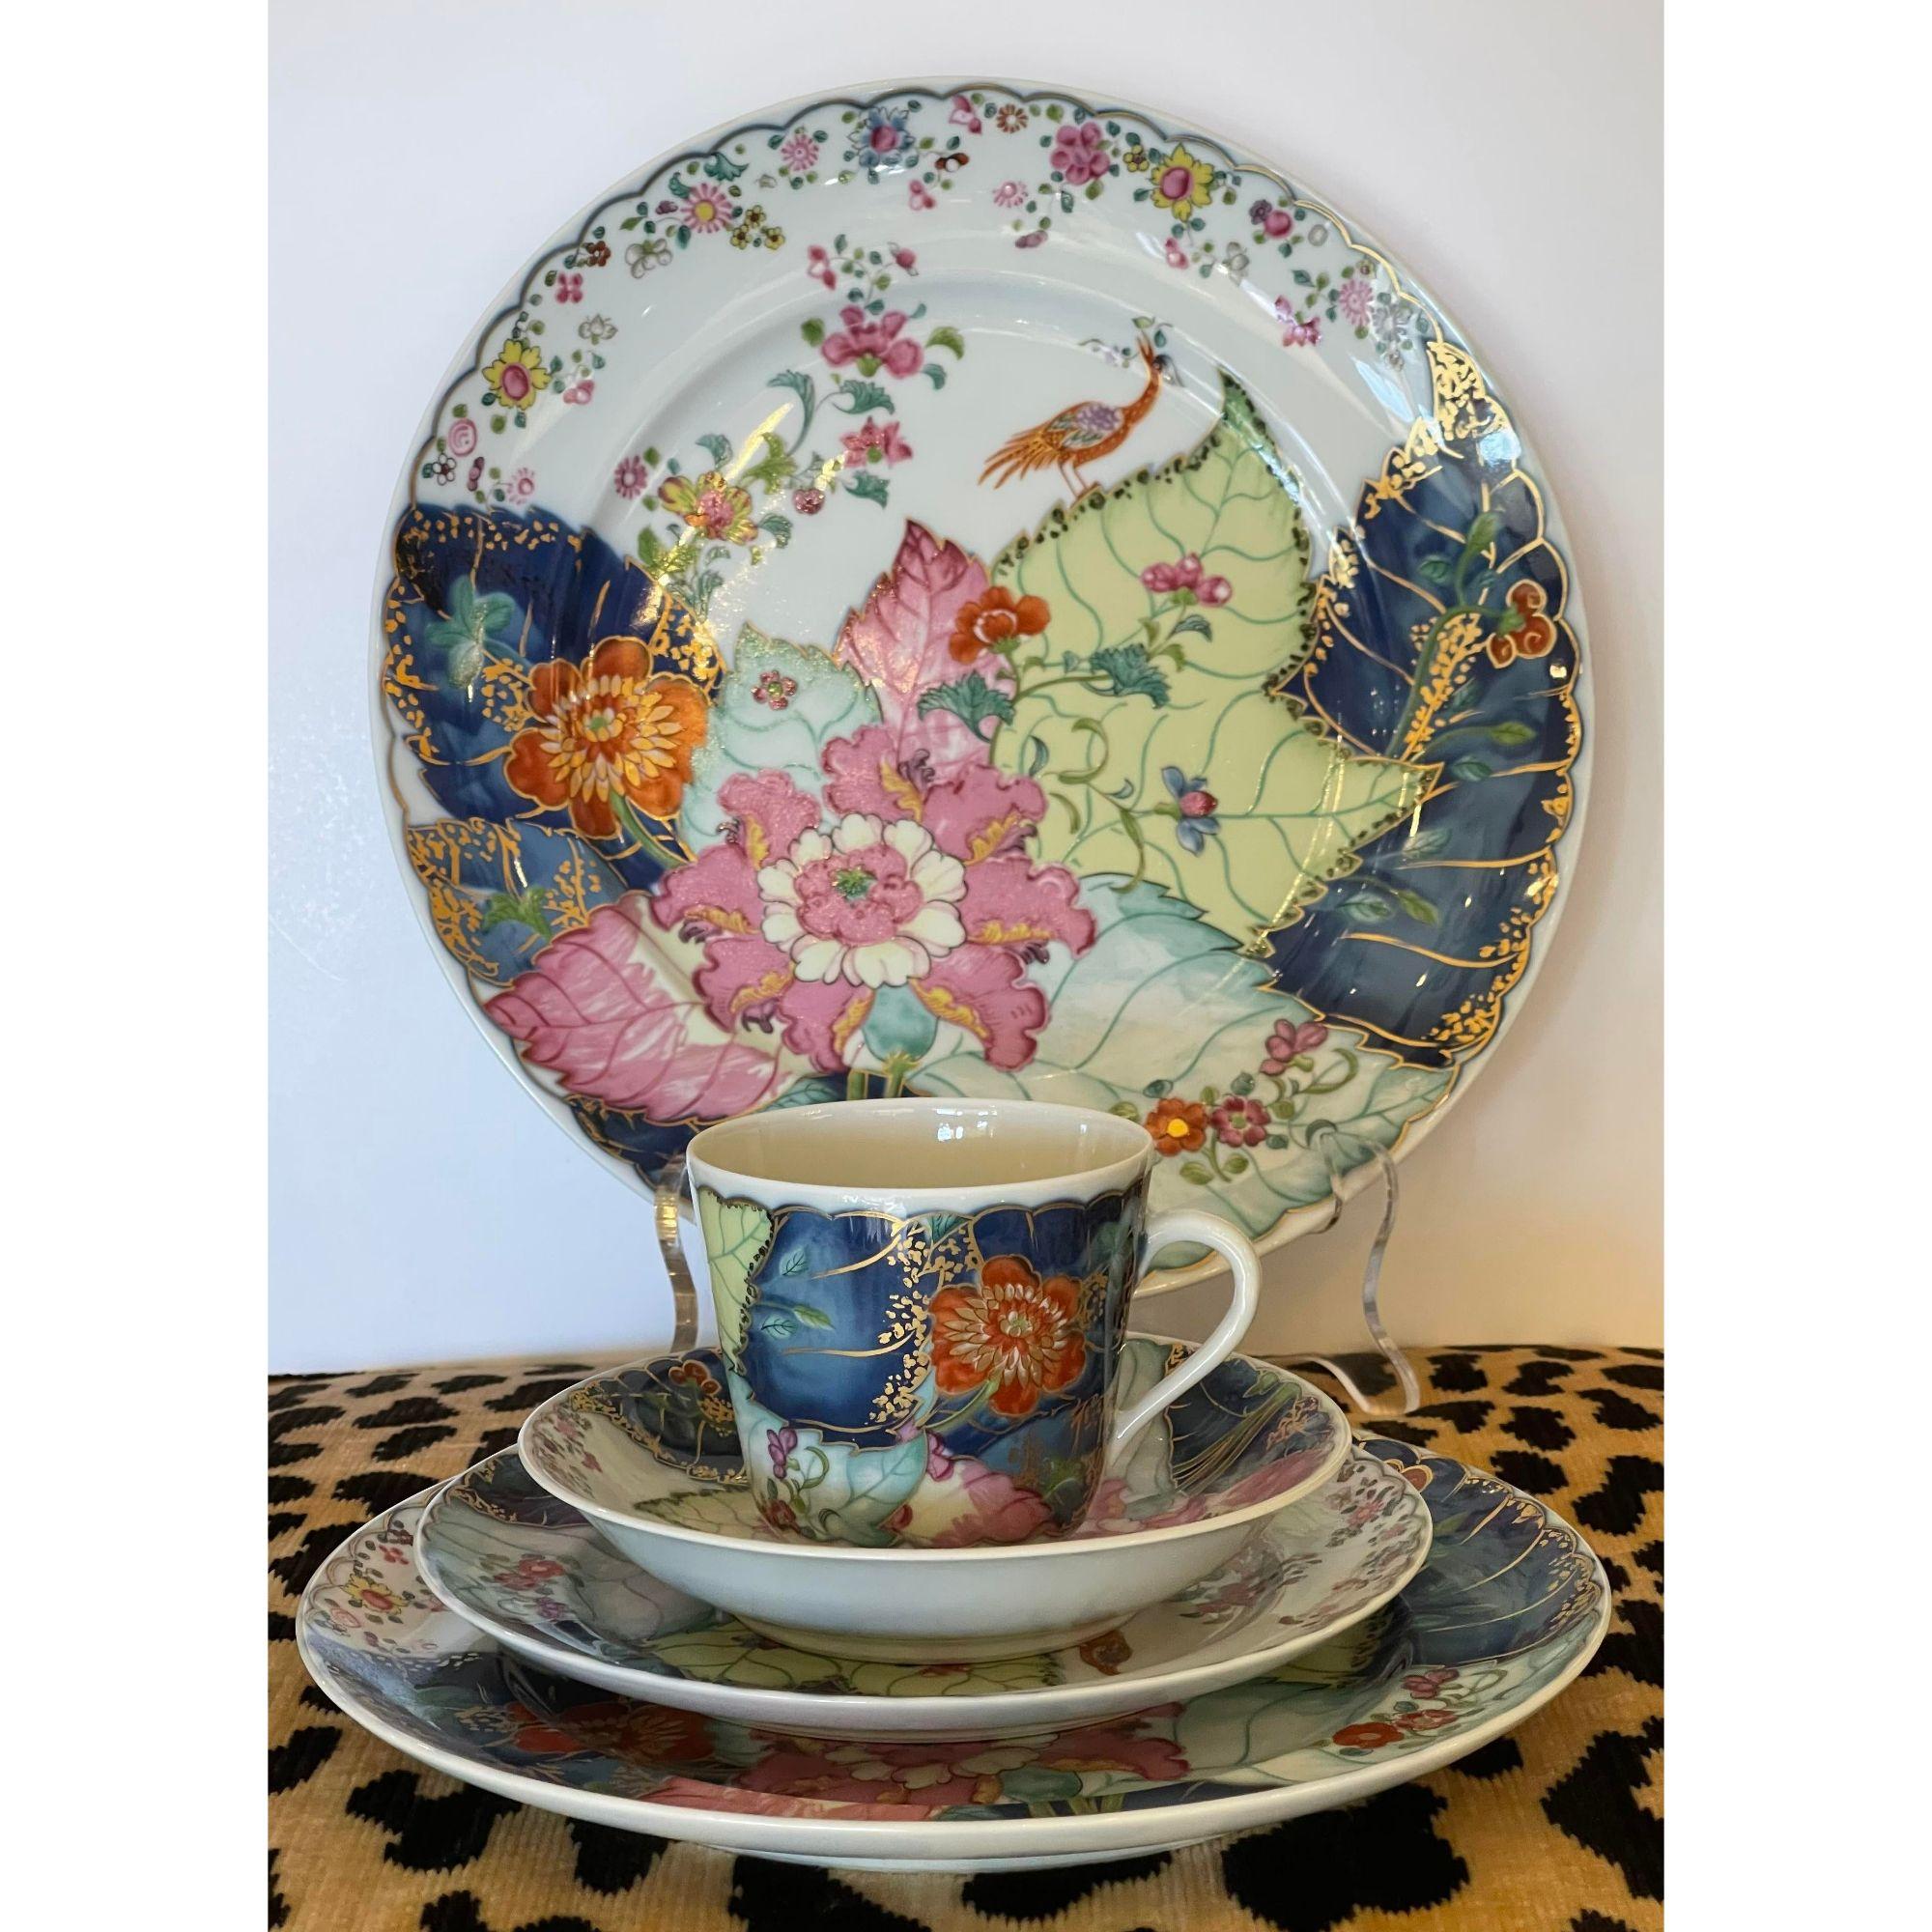 Mottahedeh Tobacco leaf 5 piece place setting. It includes the dinner plate, salad plate, bread plate, espresso cup and saucer. This listing is for one 5 piece CNN place setting but we actually have 10 available.

Additional information: